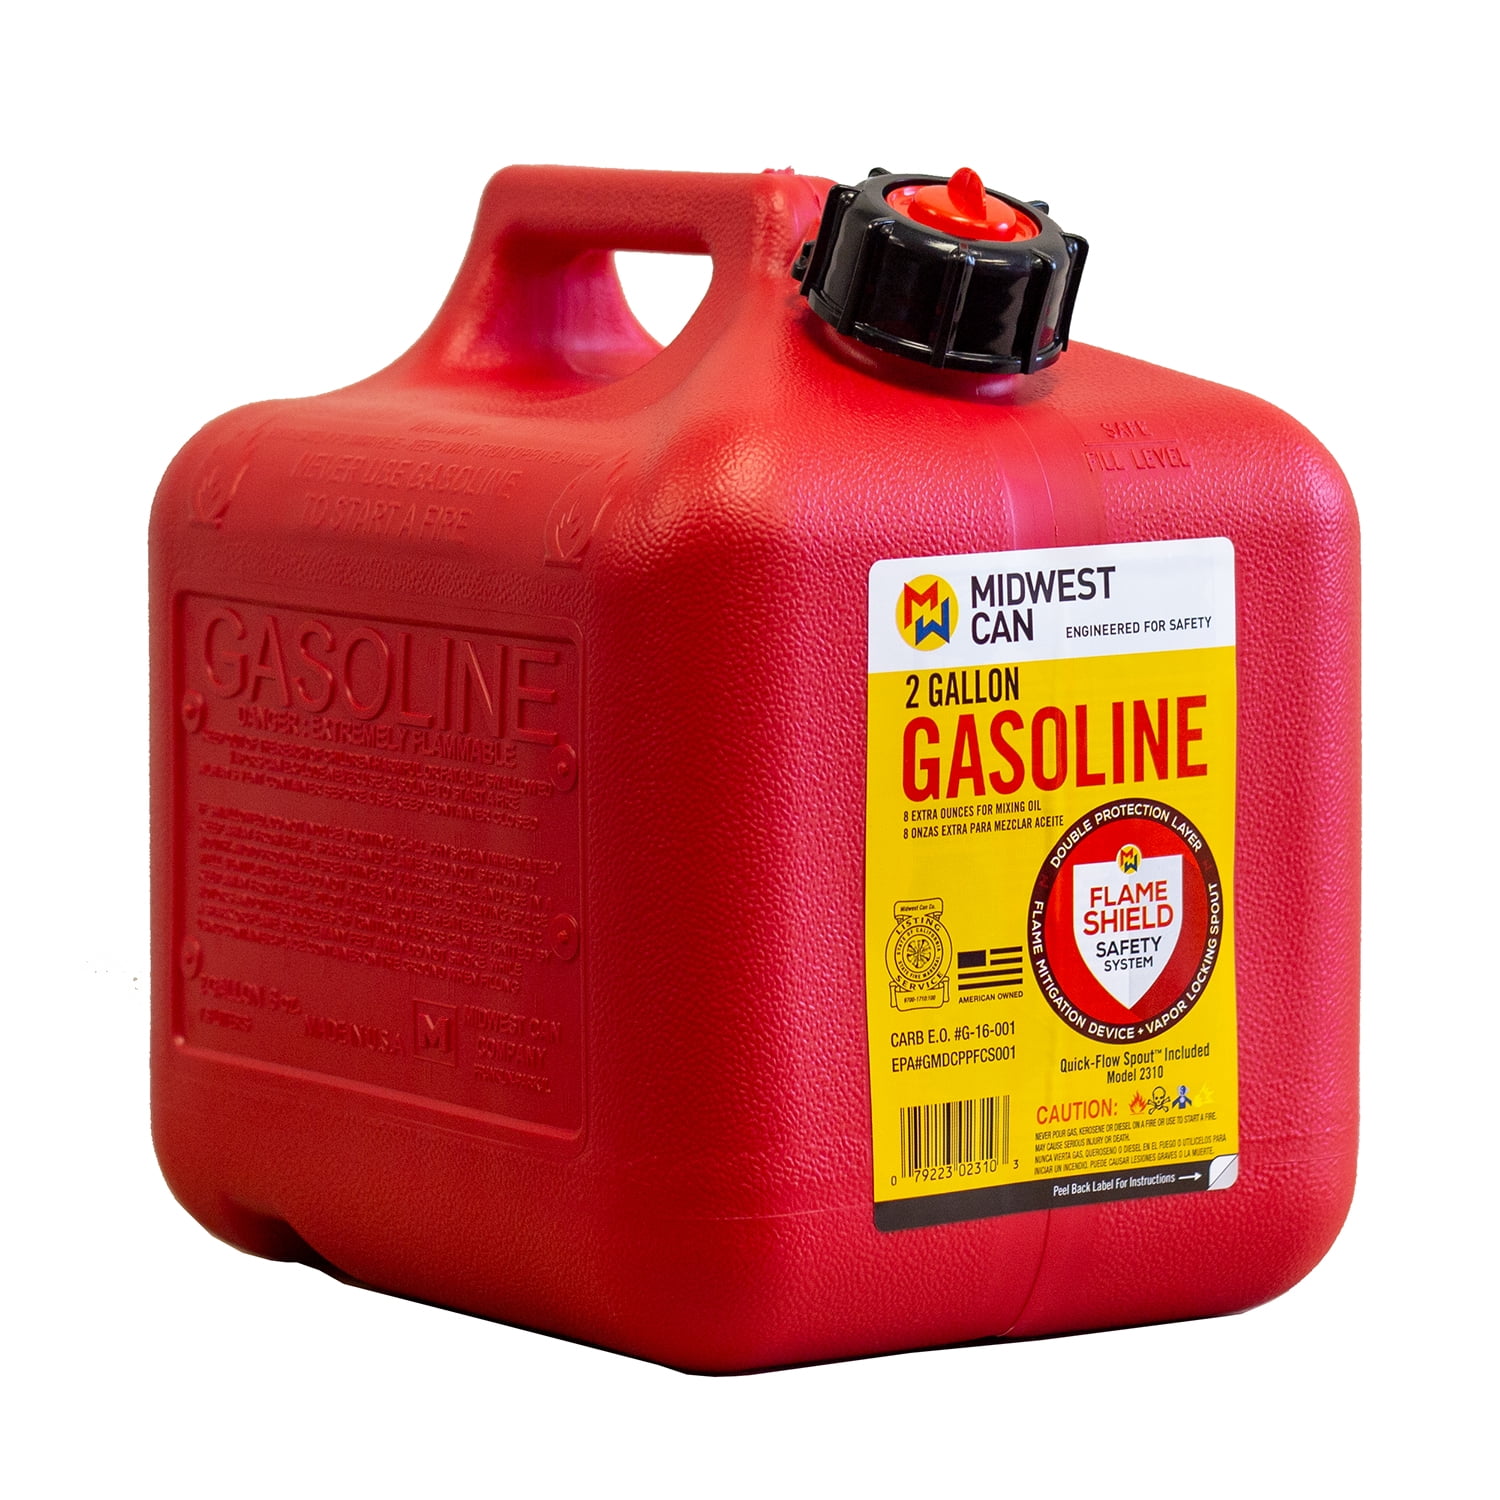 for sale online 6gal Midwest Can Safe-Flo Gasoline Container 6610 